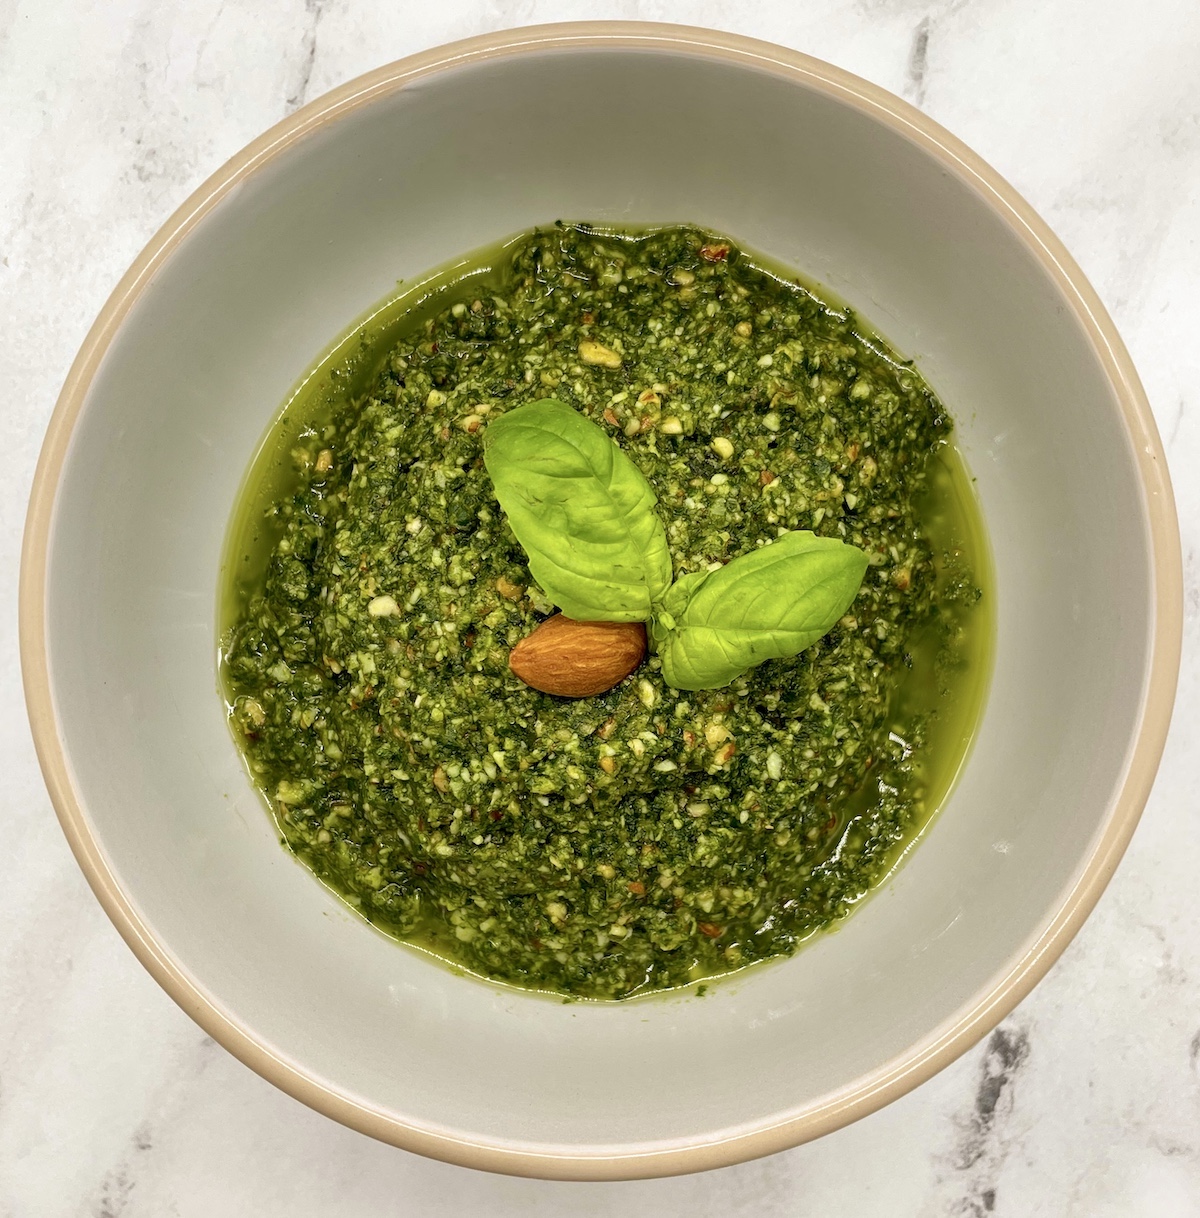 Bright green almond pesto in a white bowl on a white marble counter garnished with fresh basil leaves and an almond